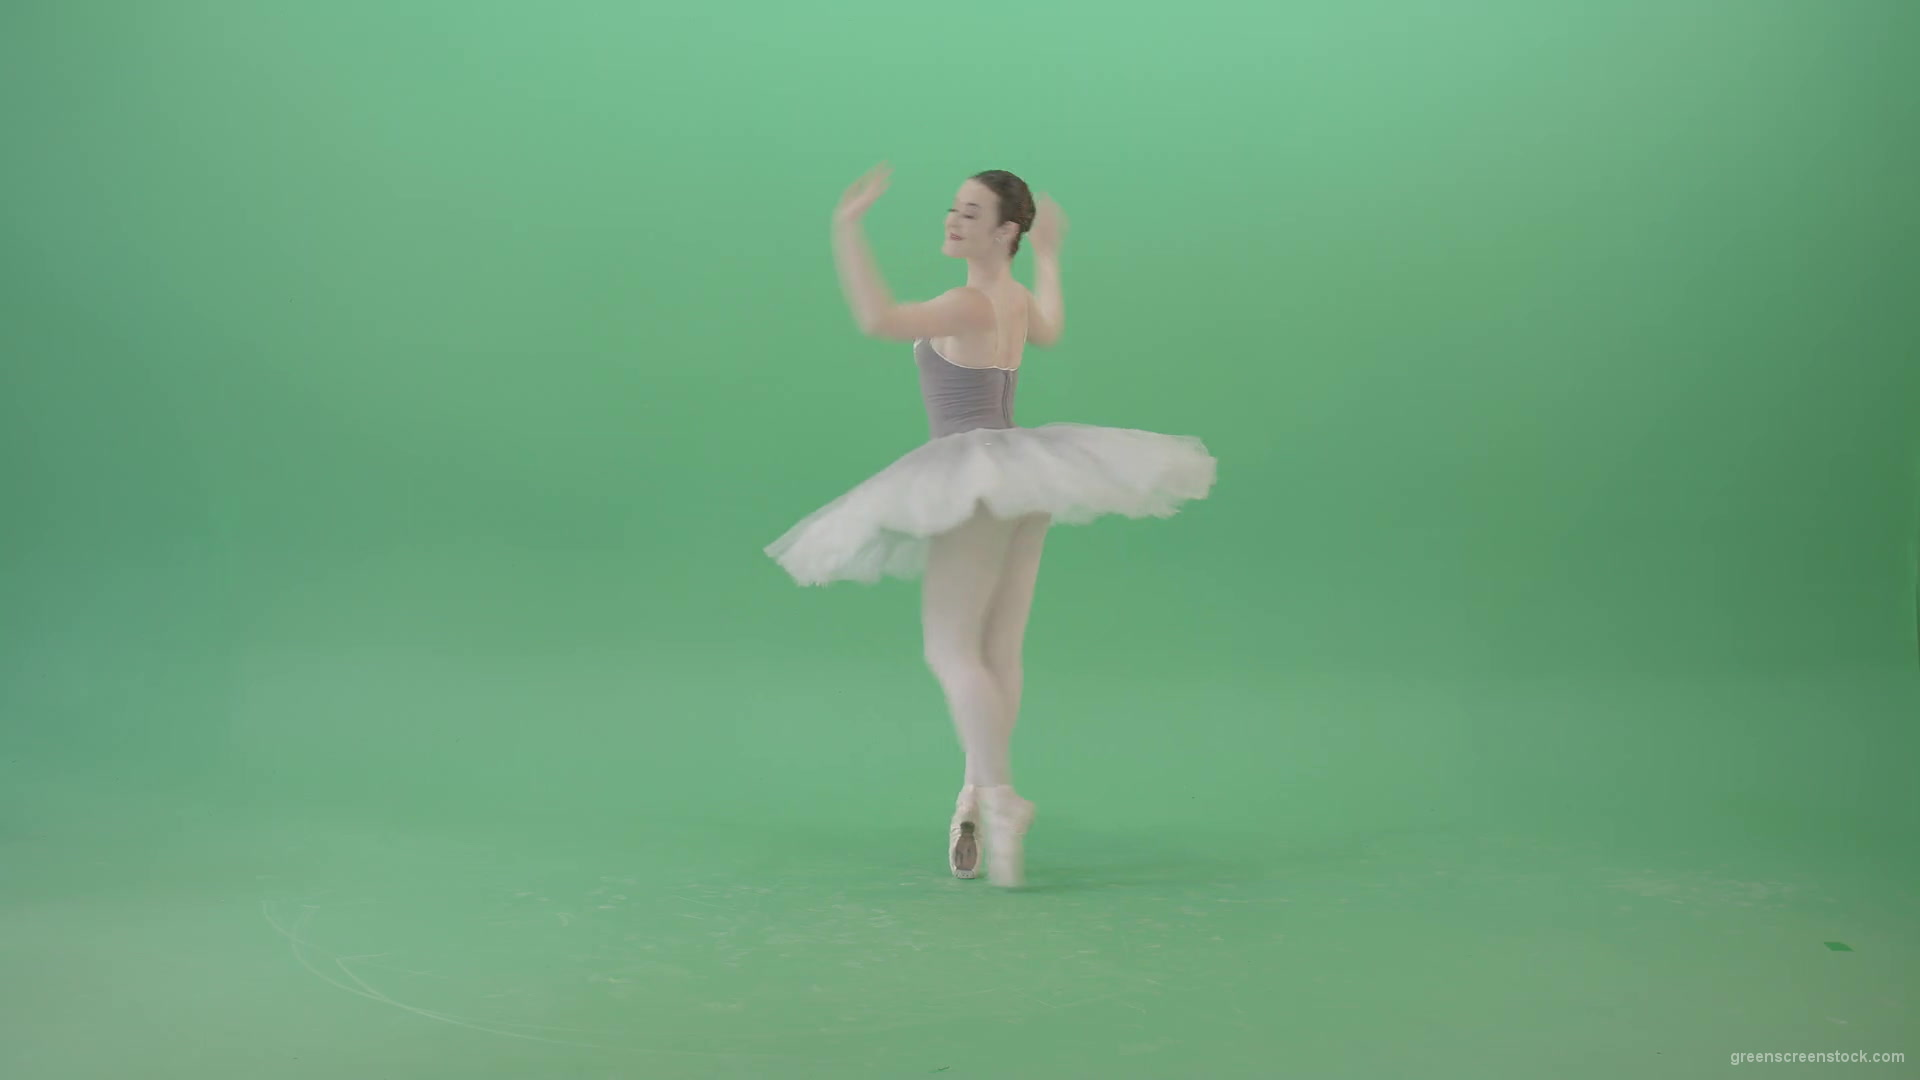 Smal-ballerina-girl-spinning-on-the-place-in-ballet-dance-art-on-green-screen-4K-Video-Footage-1920_008 Green Screen Stock